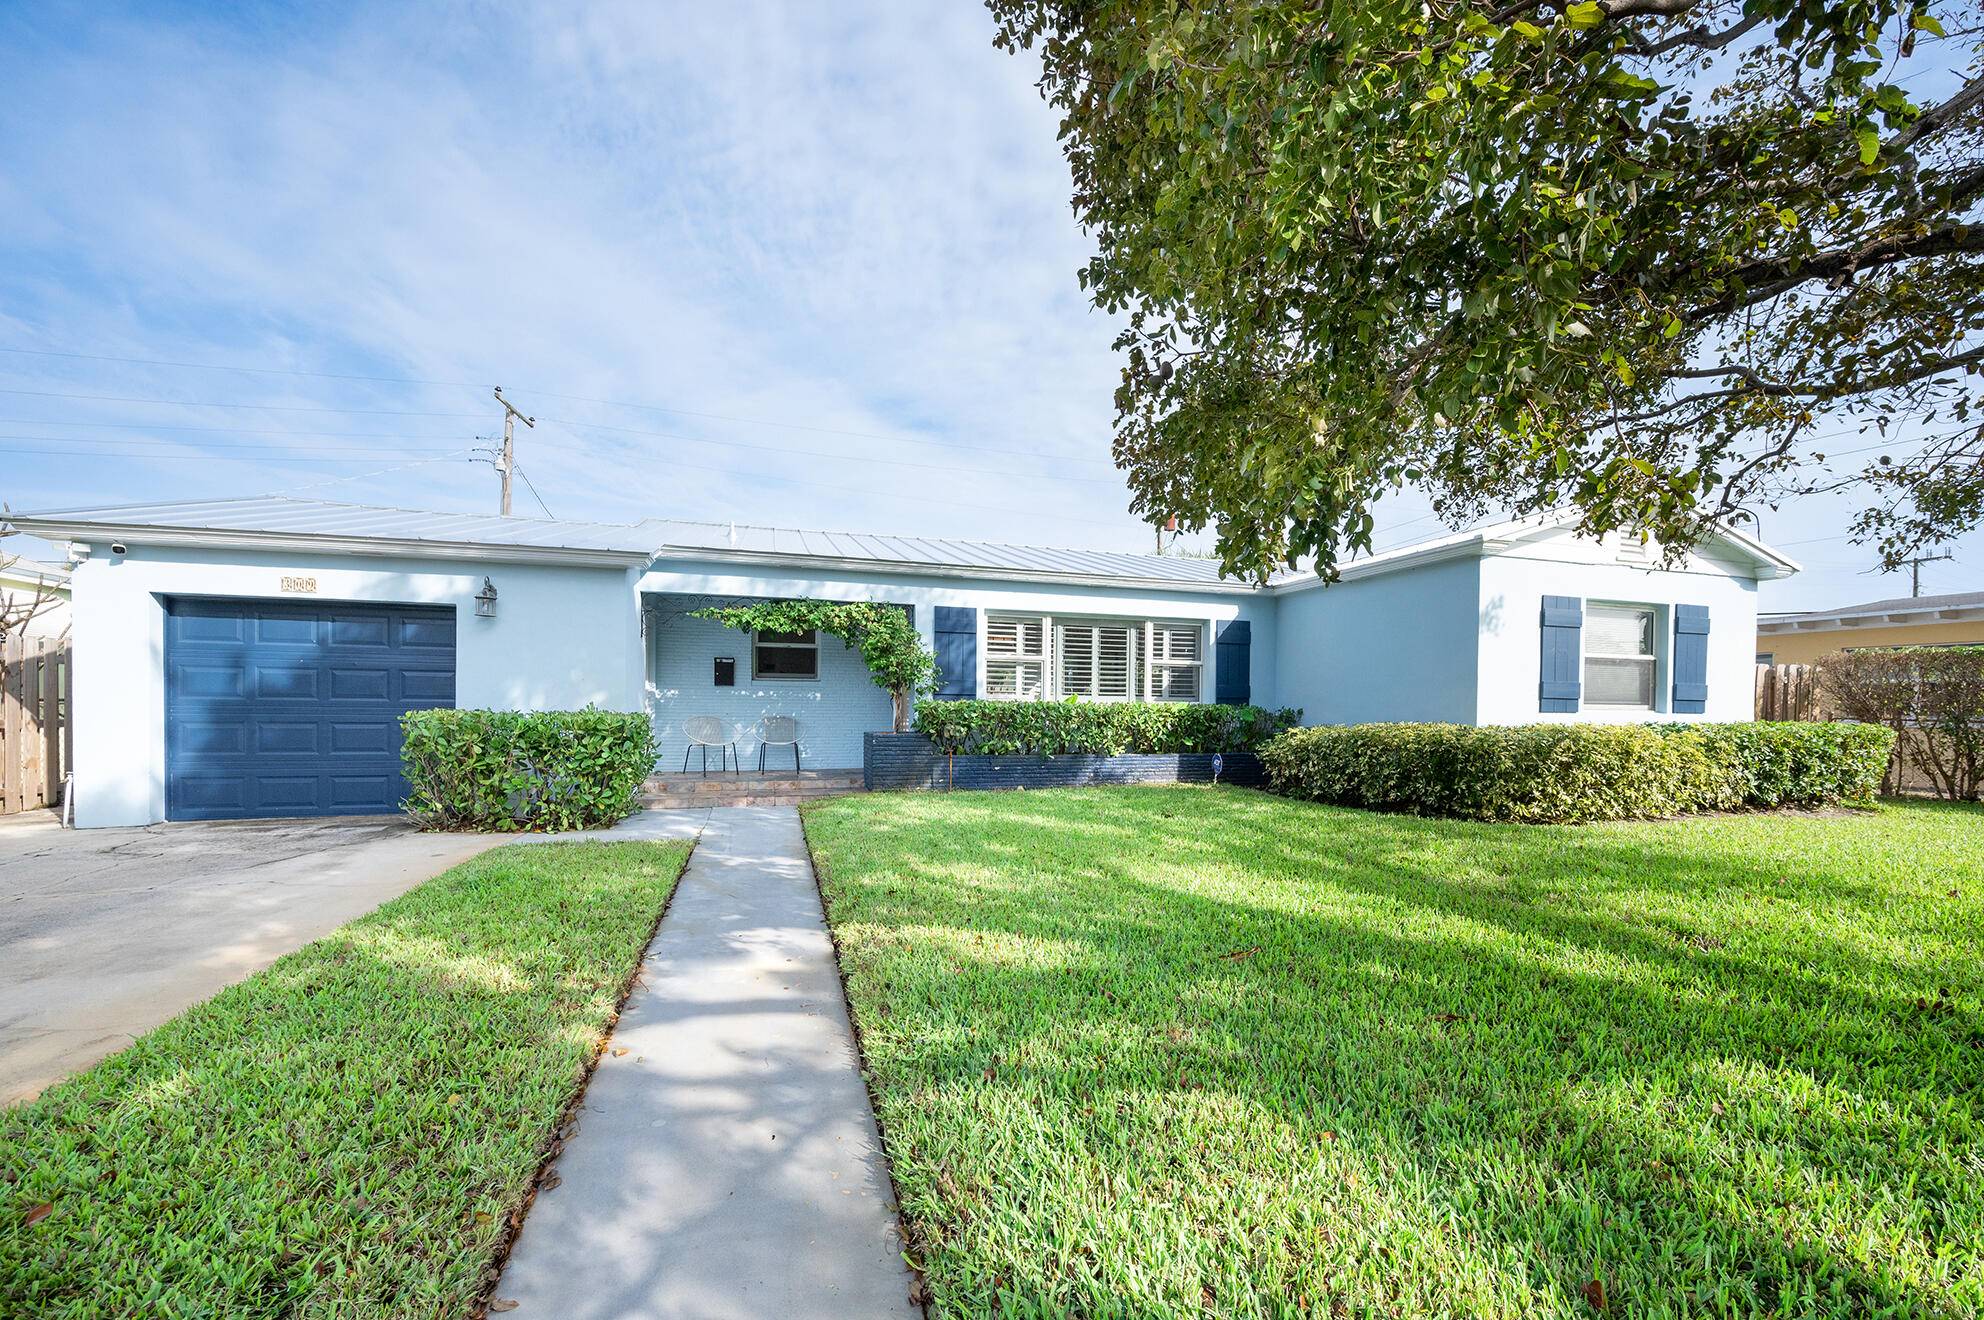 Step into the heart of this recently remodeled charming 1950's CBS home offering an exciting blend of history and modern upgrades.